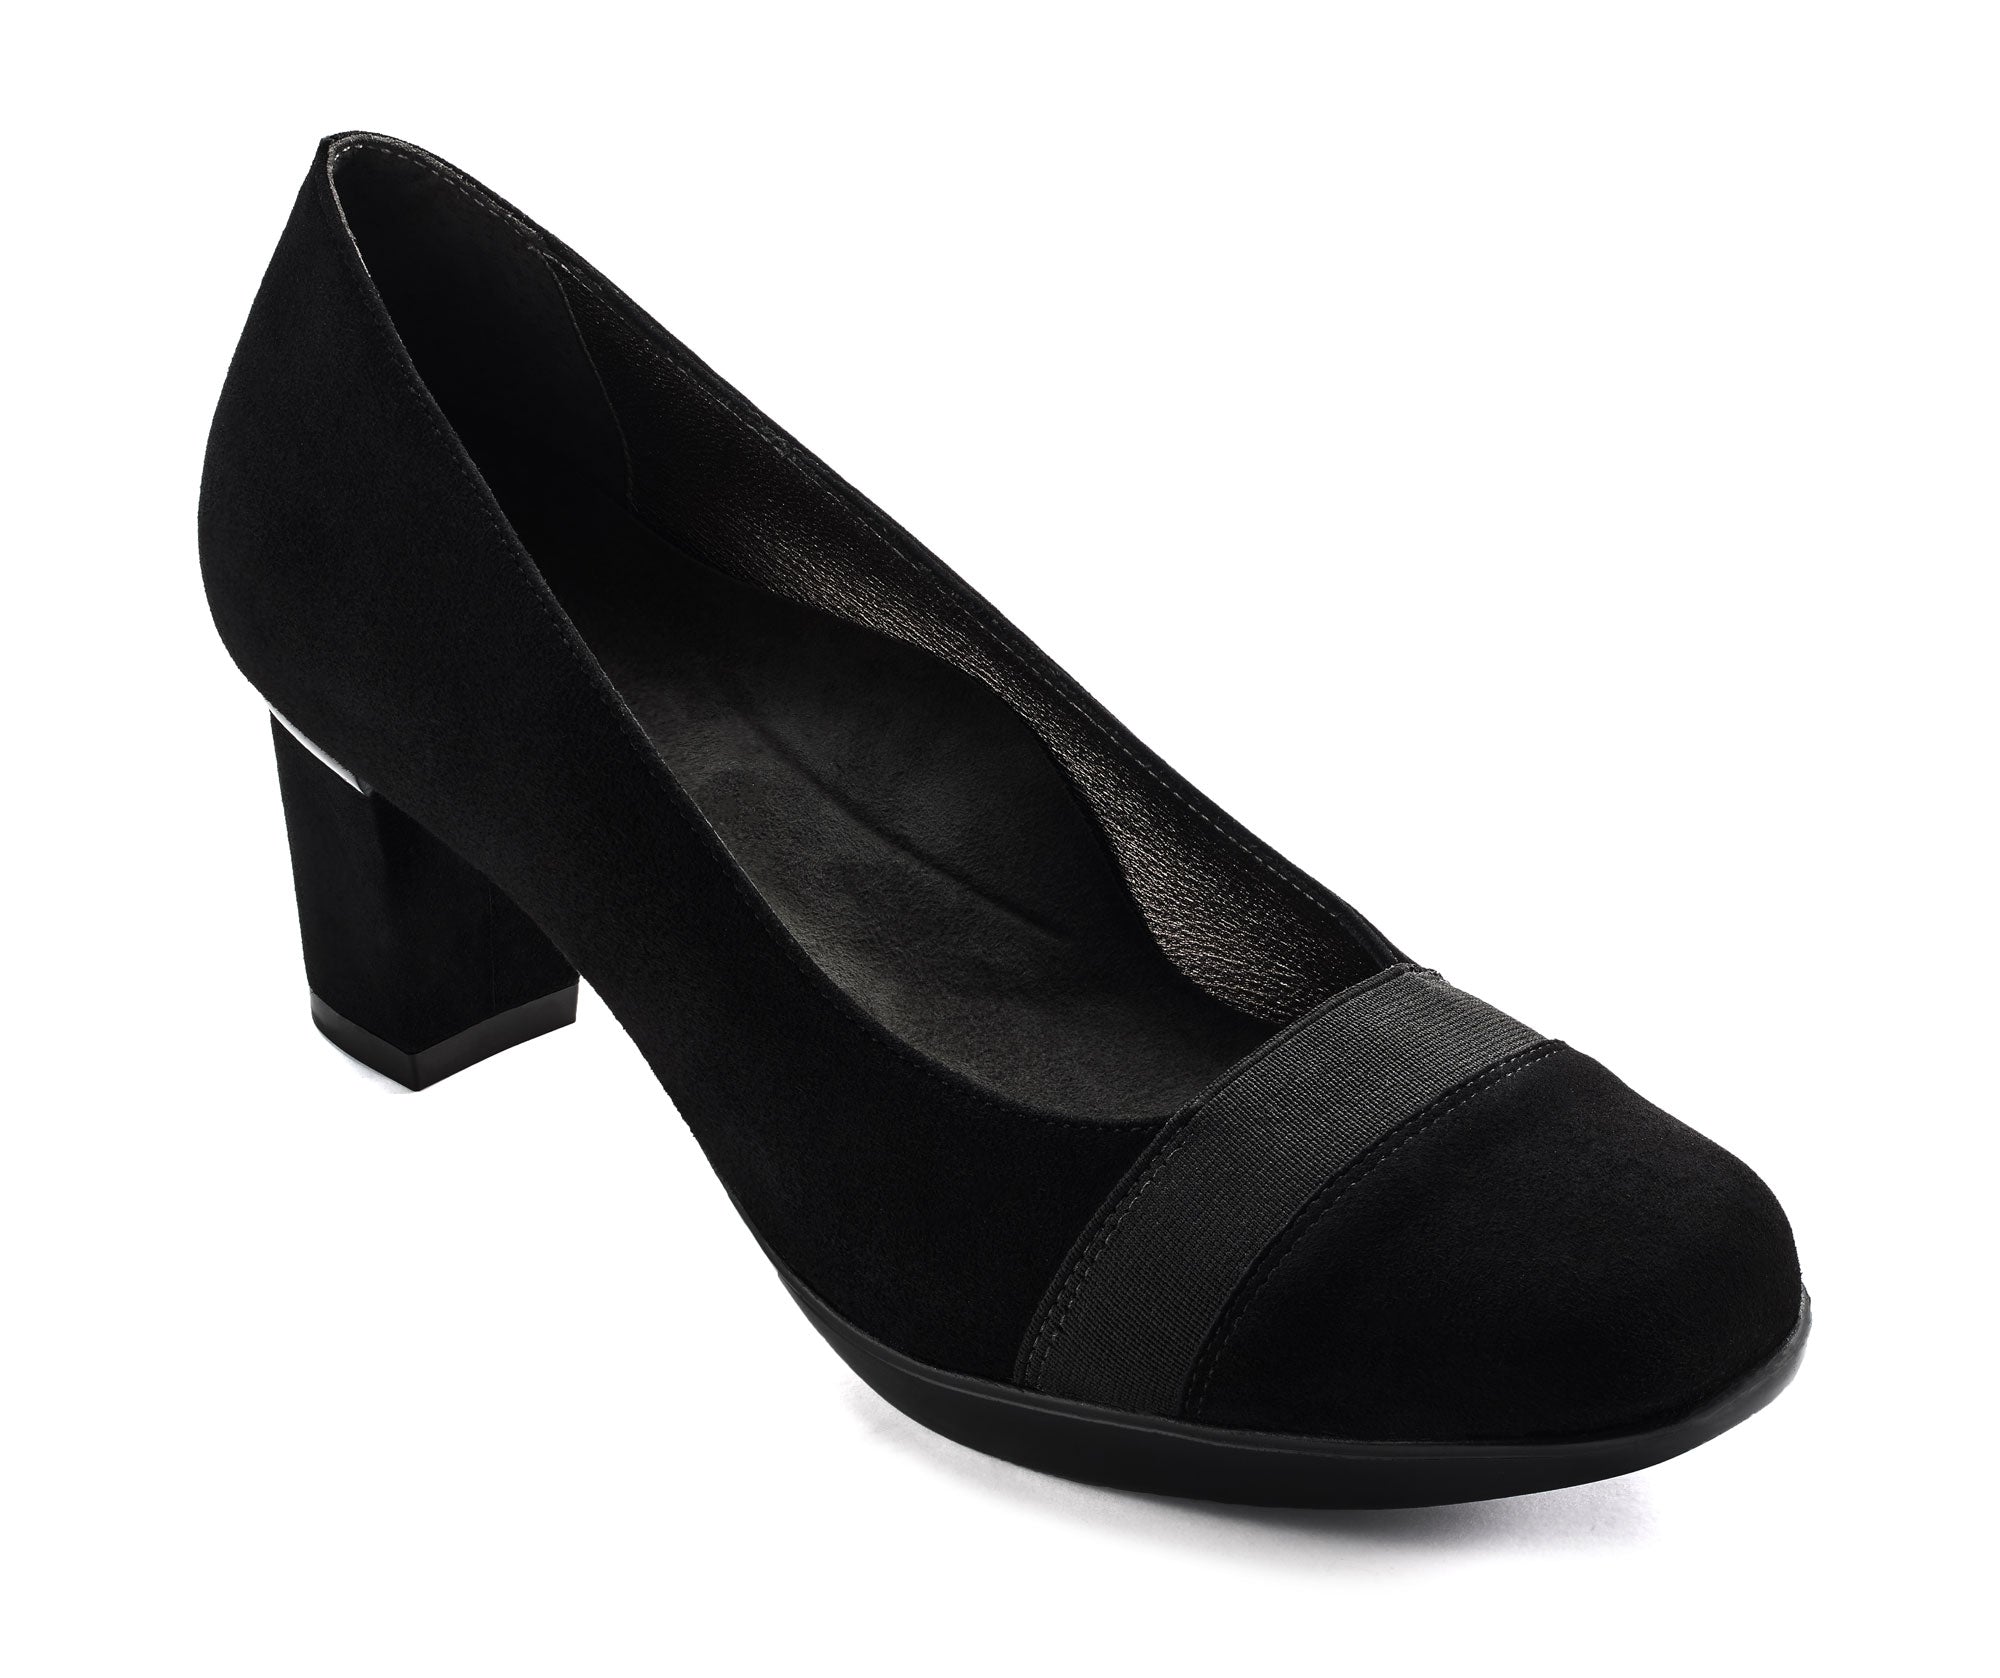 Black suede transy heels | Street Style Store | SSS